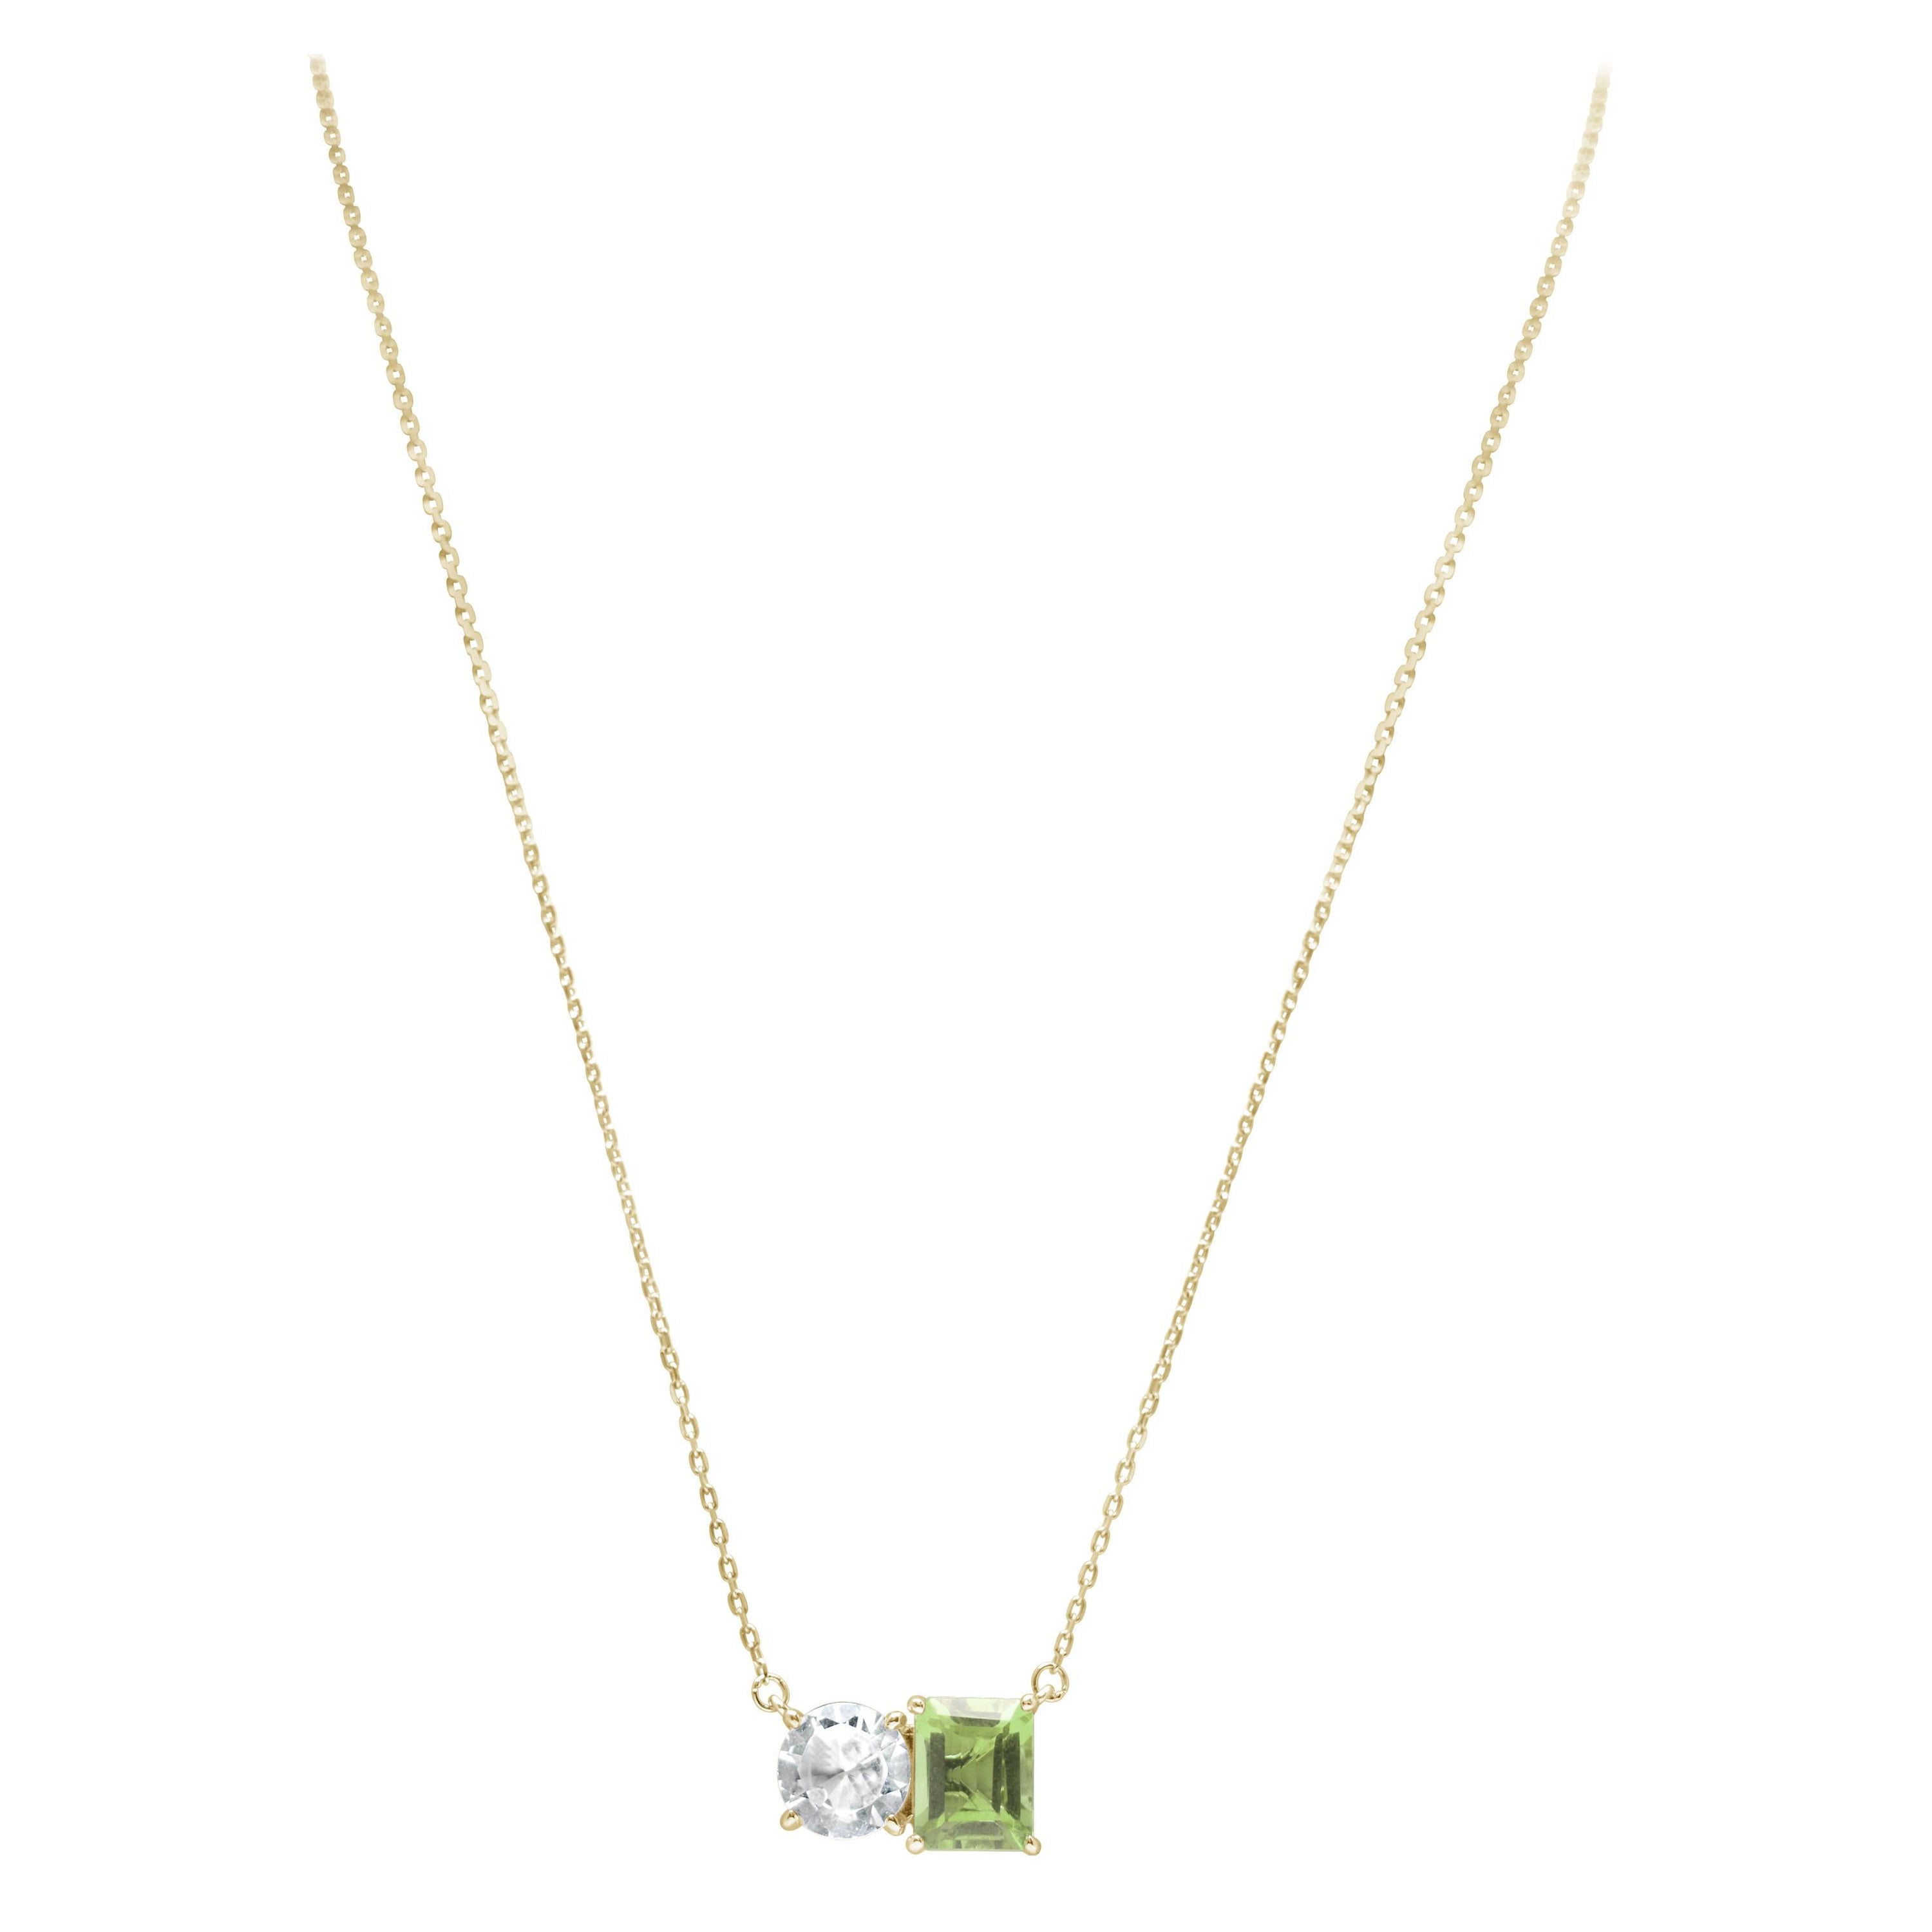 Suzy Levian Yellow Sterling Silver White Topaz Green Amethyst Two Stone Necklace